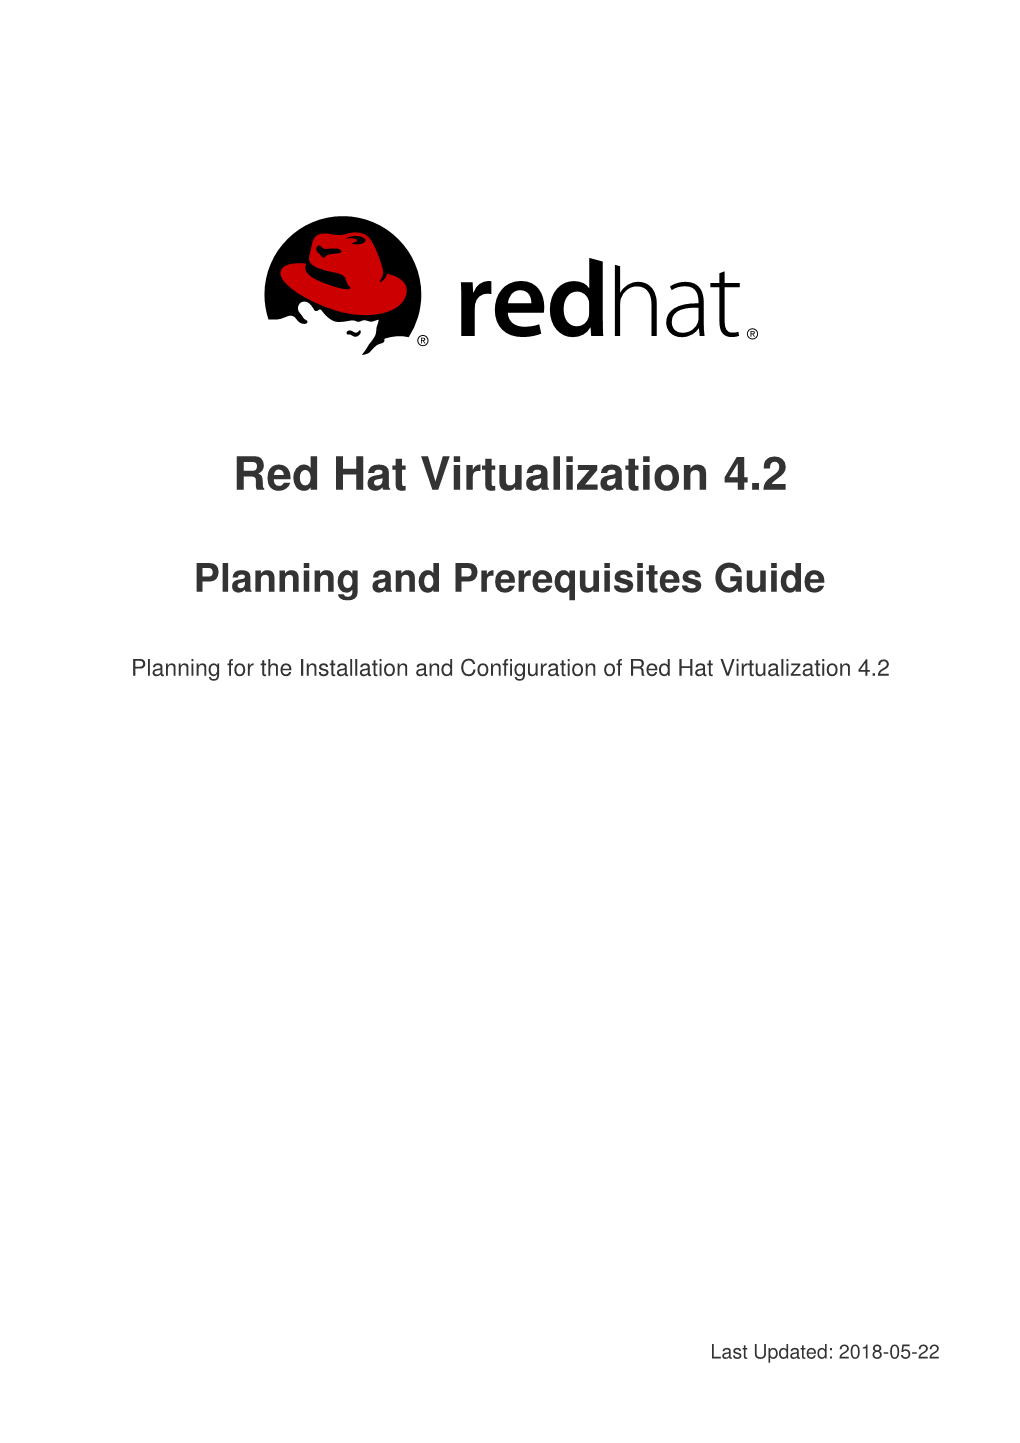 Red Hat Virtualization 4.2 Planning and Prerequisites Guide